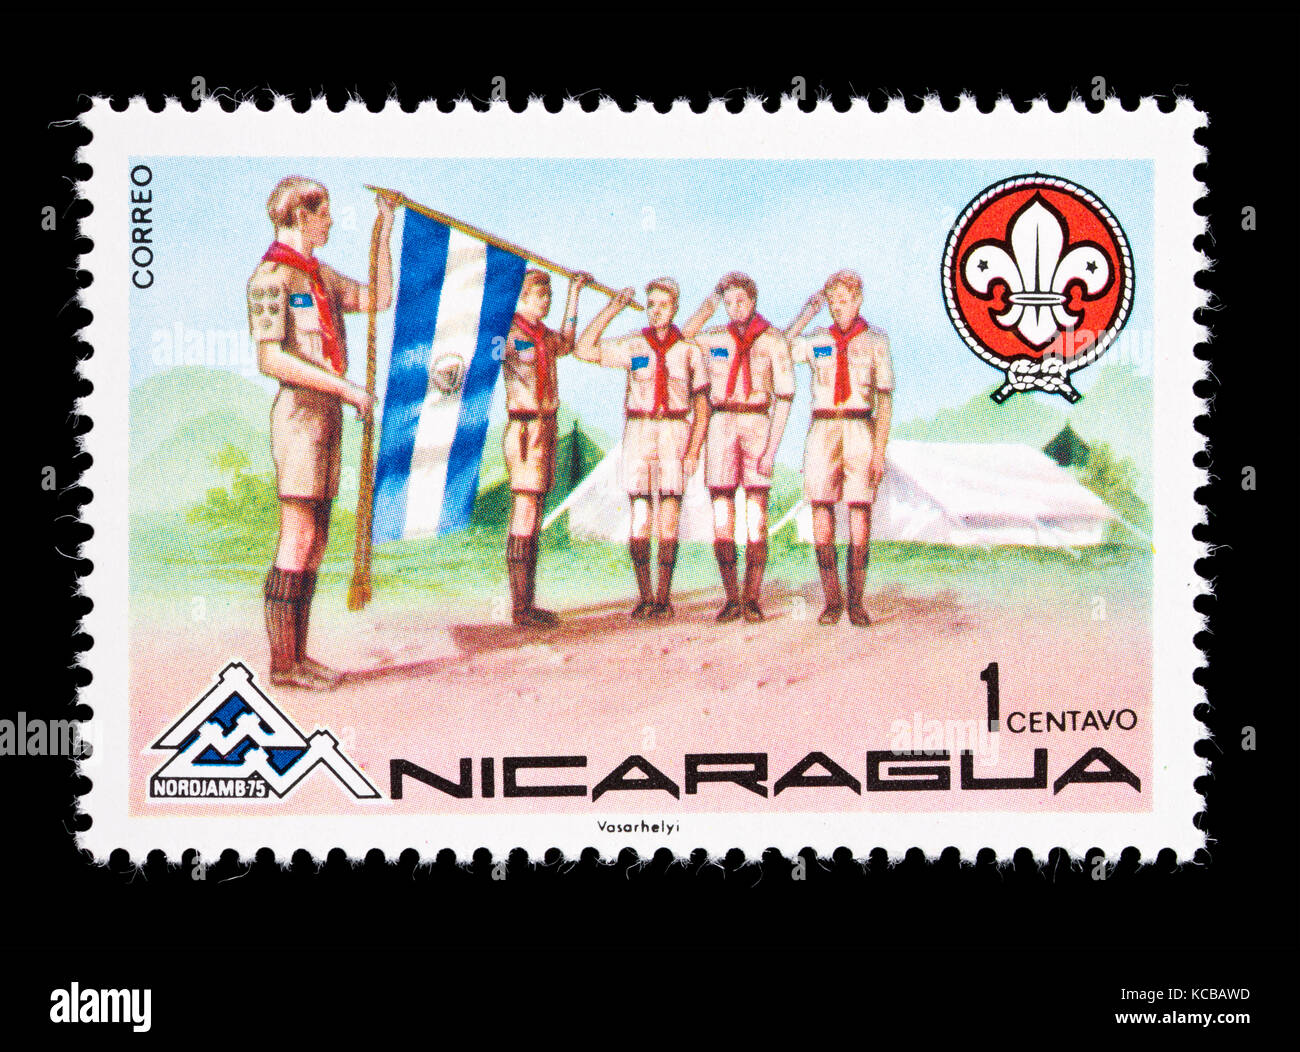 Postage stamp from Nicaragua depicting boy scouts and flags, issued for the 1975 World Scout Jamboree in Lillehammer, Norway. Stock Photo